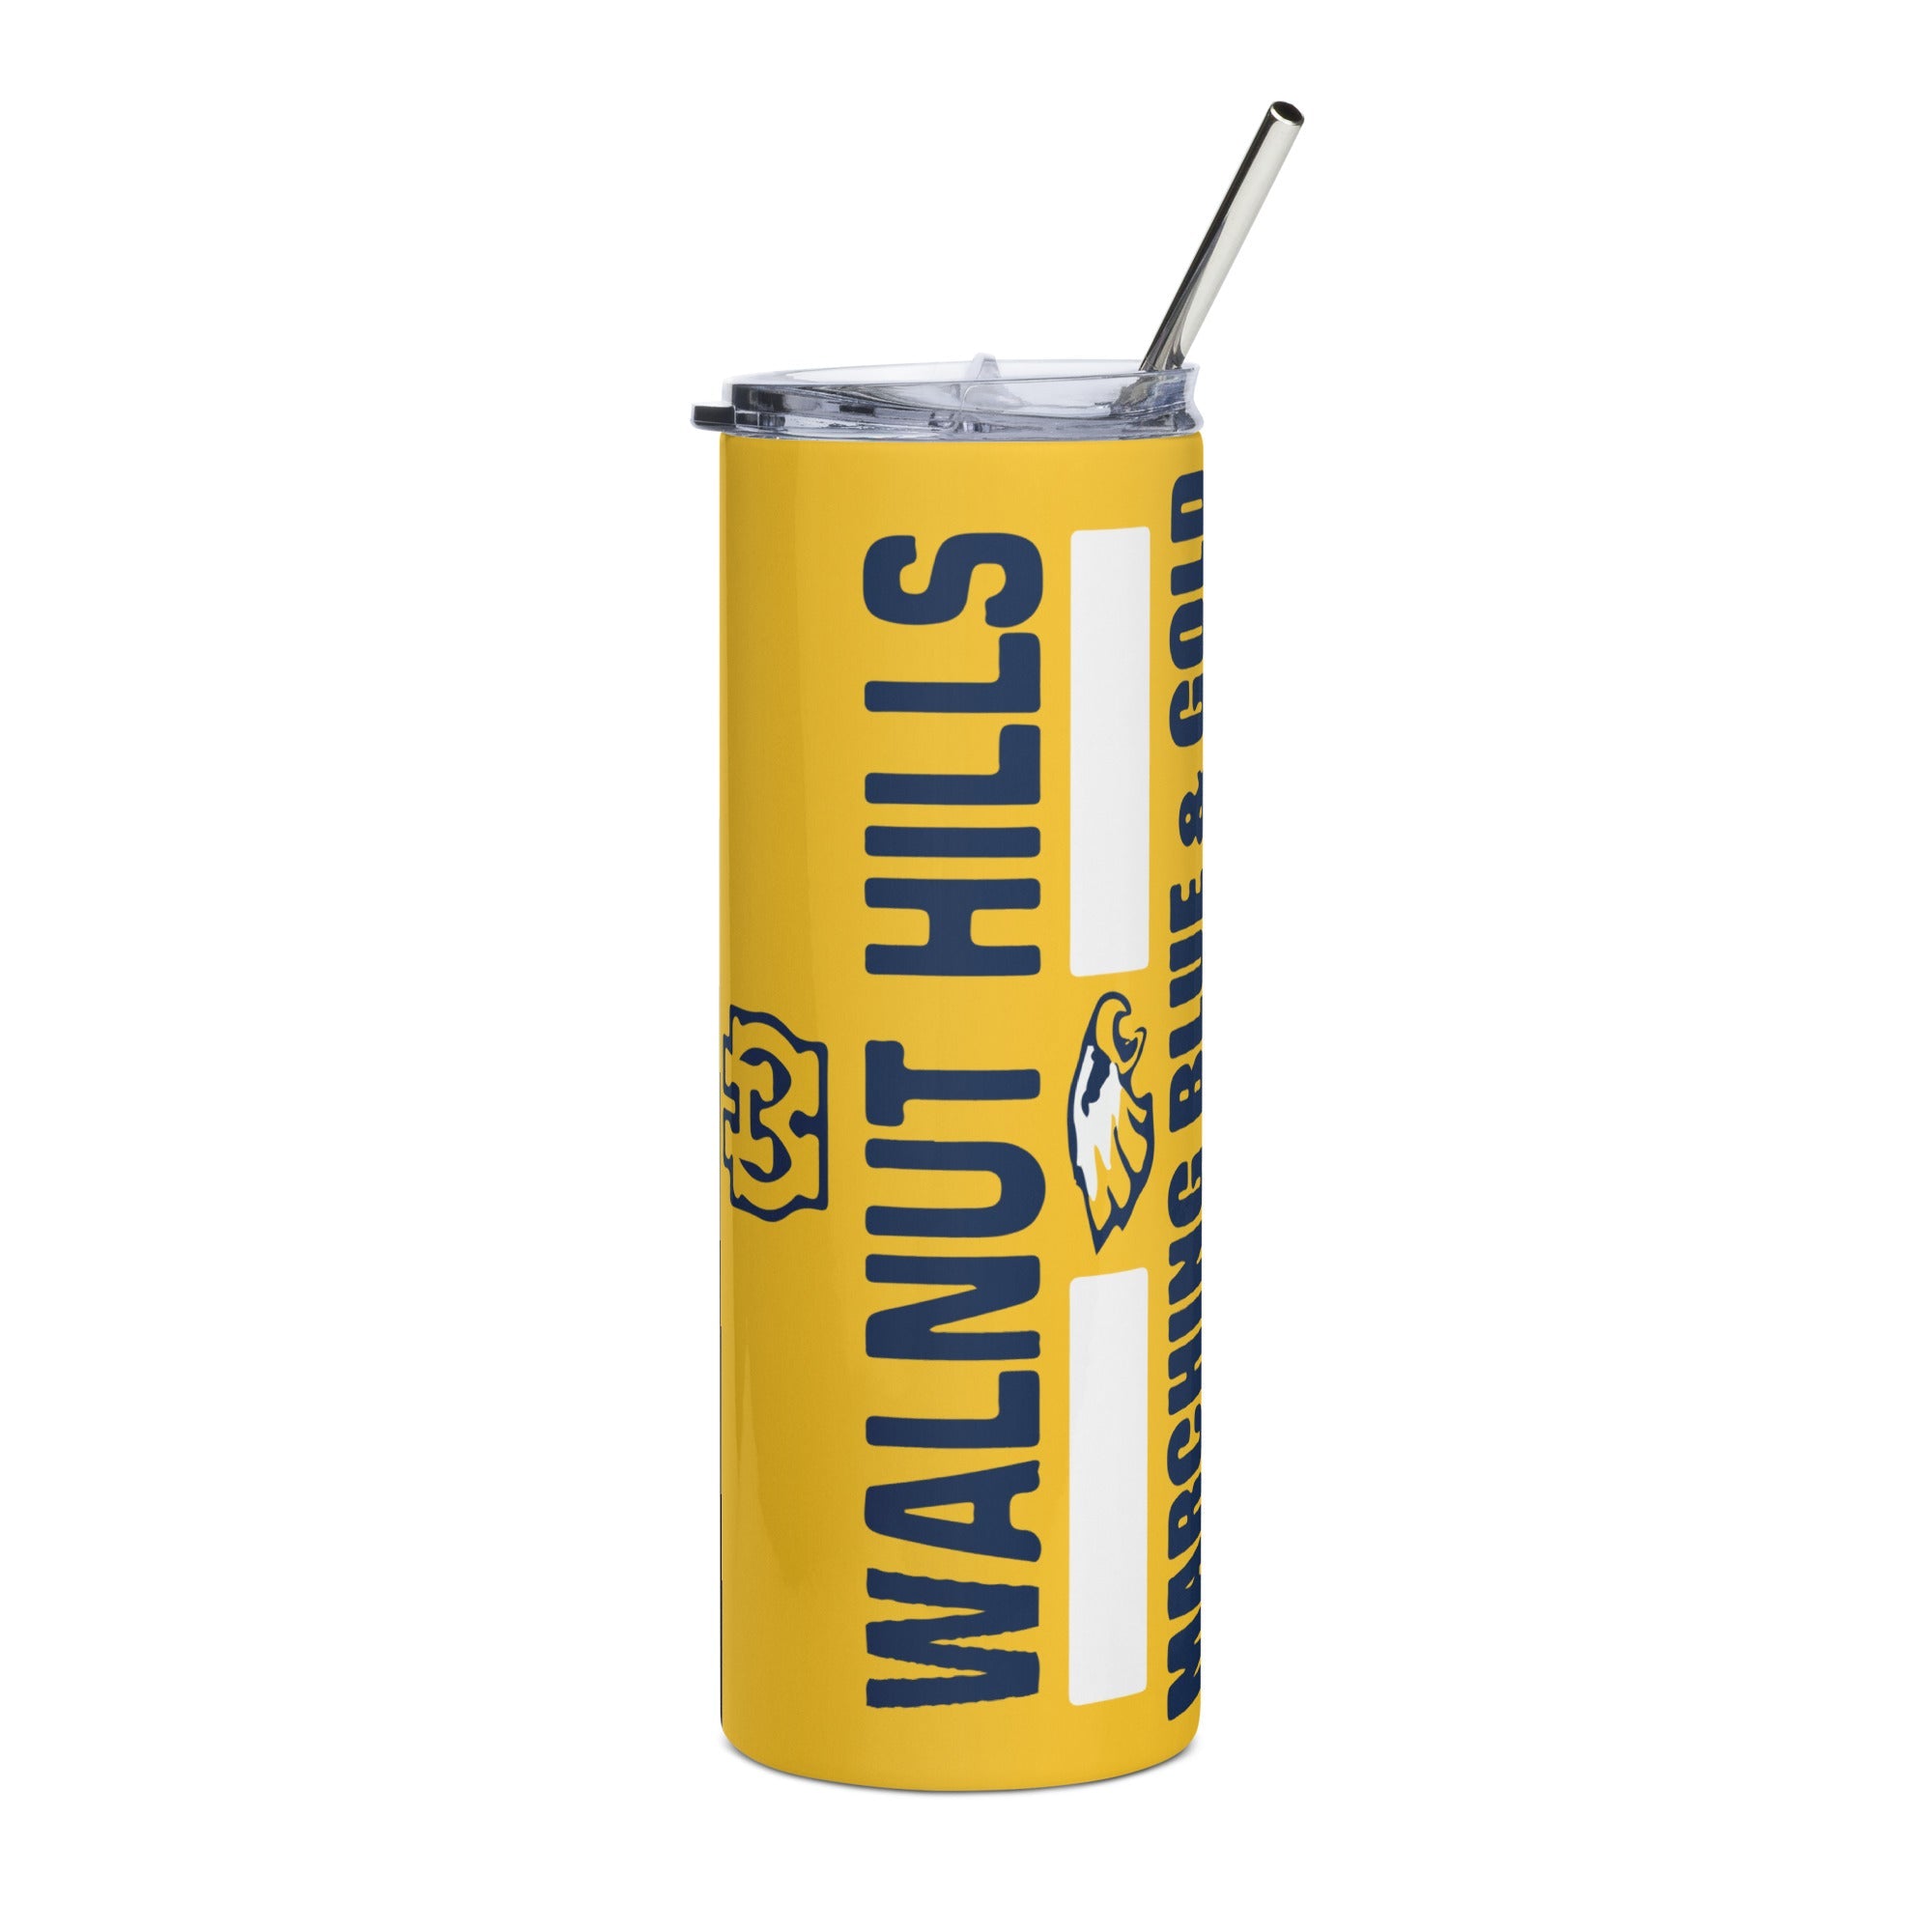 WHMB Stainless steel tumbler